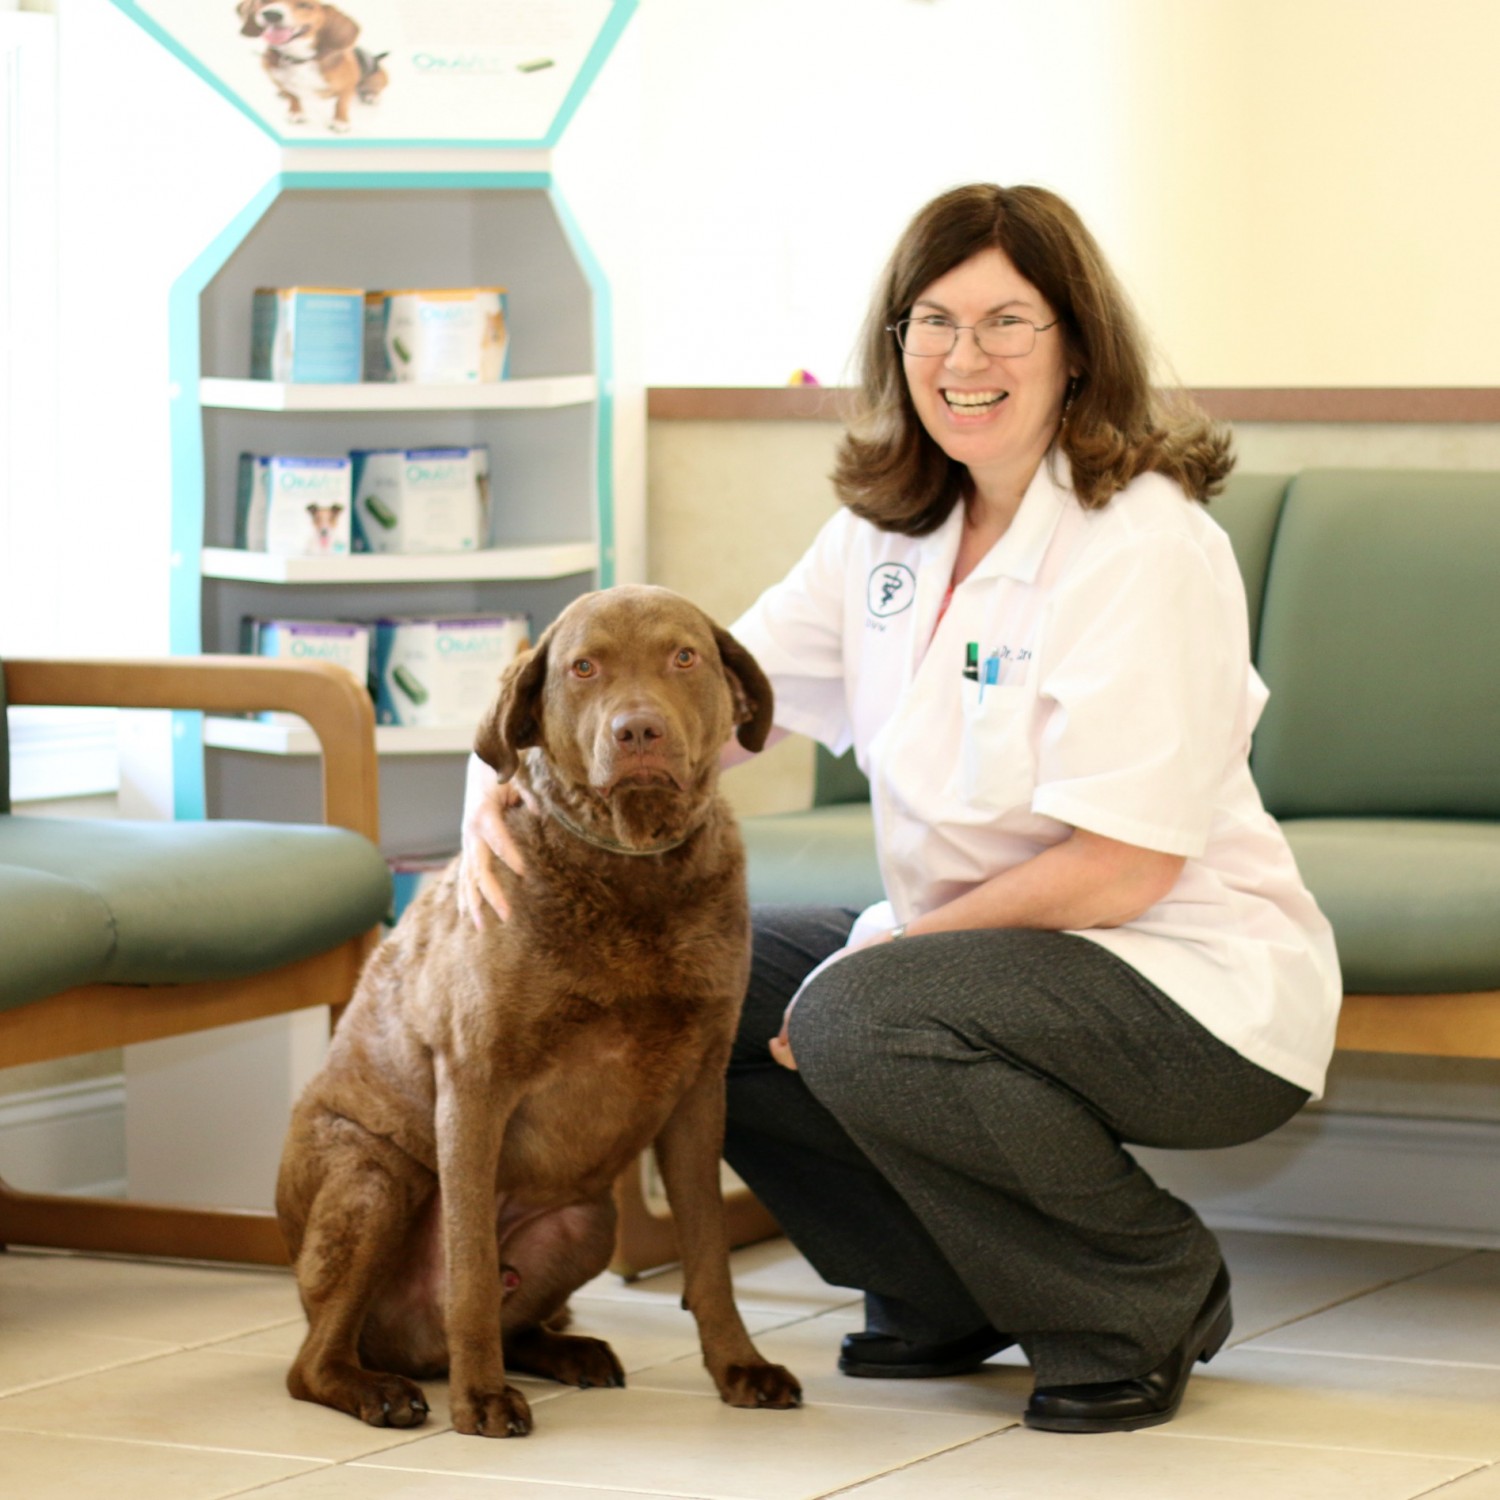 Veterinarian crouching and posing with brown dog